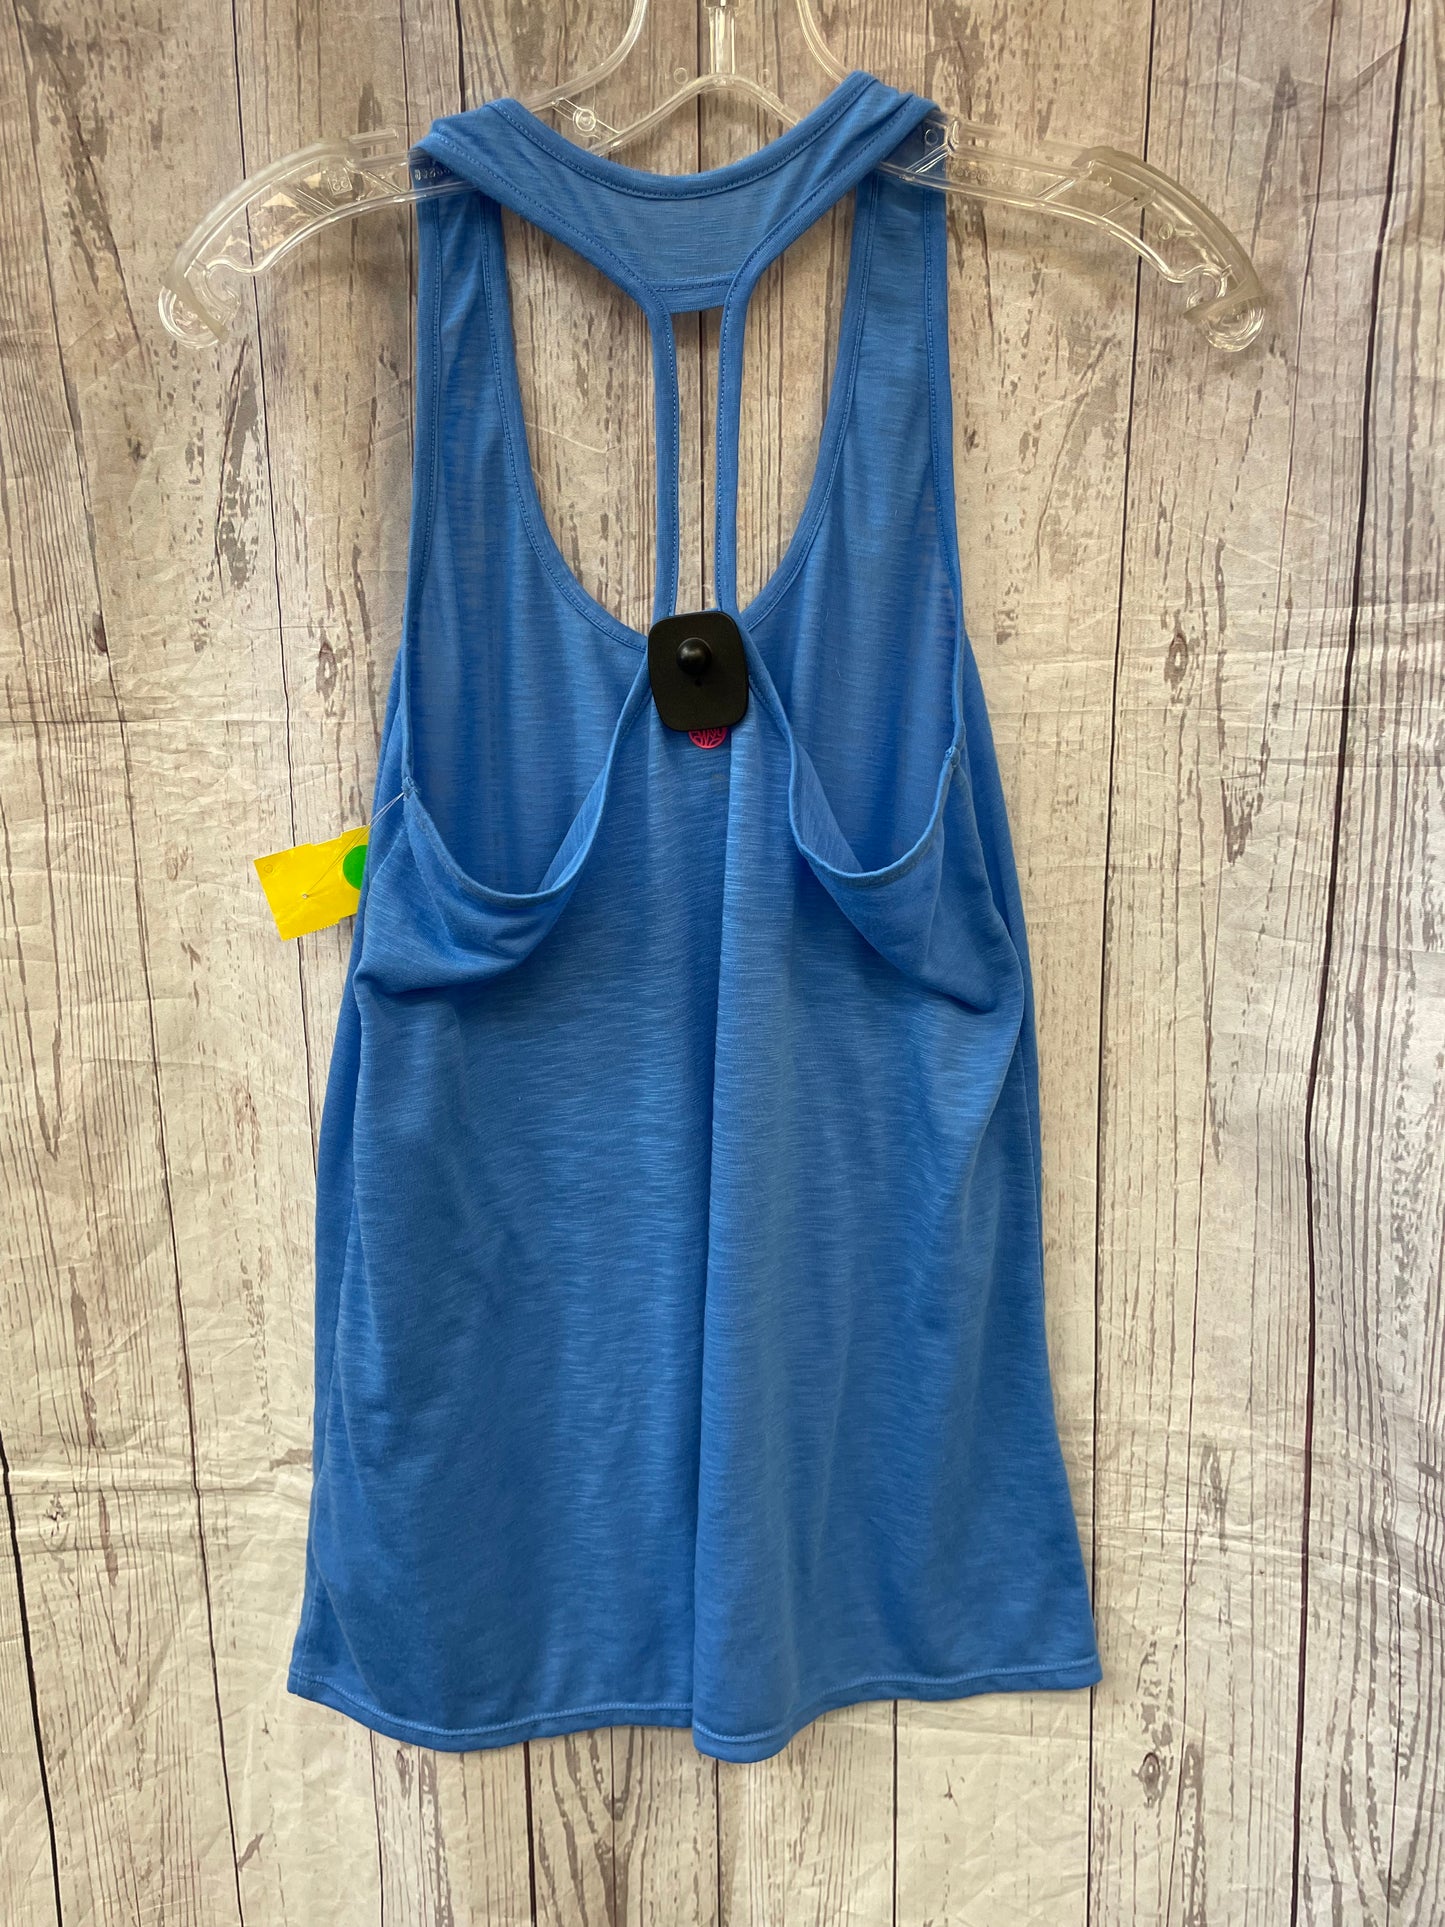 Athletic Tank Top By Lilly Pulitzer  Size: S